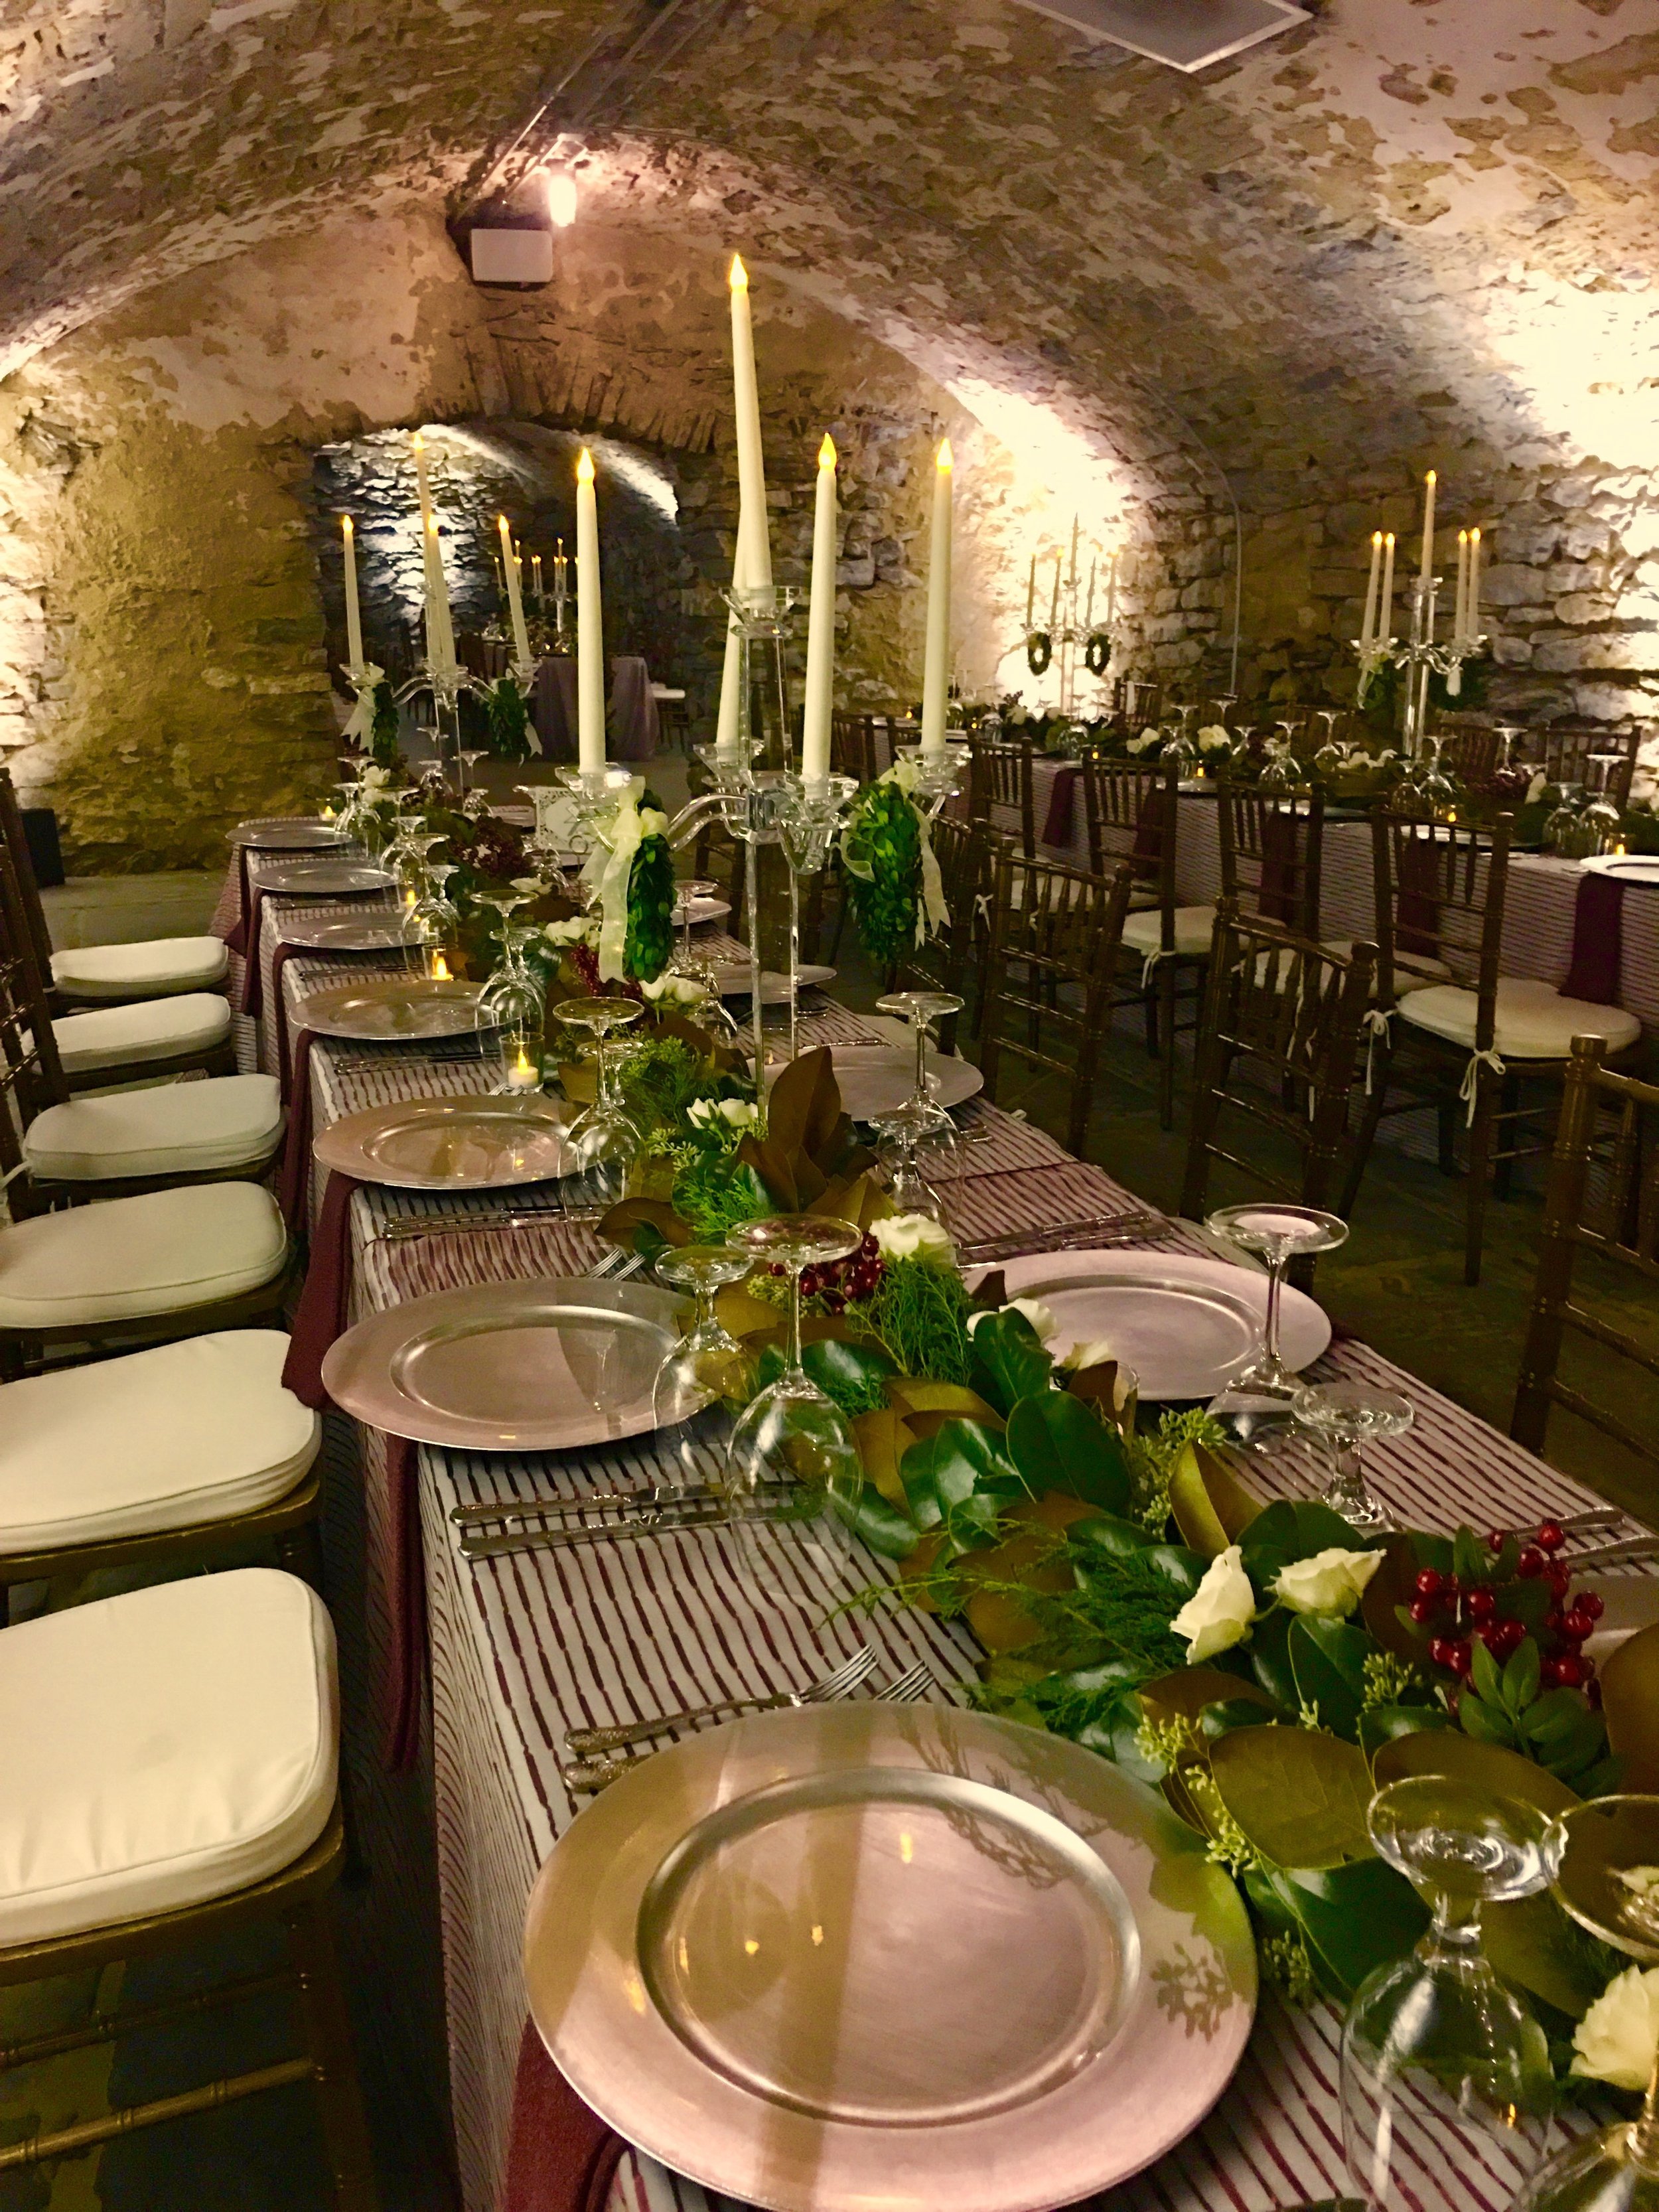 Long dinner table set up in catacombs